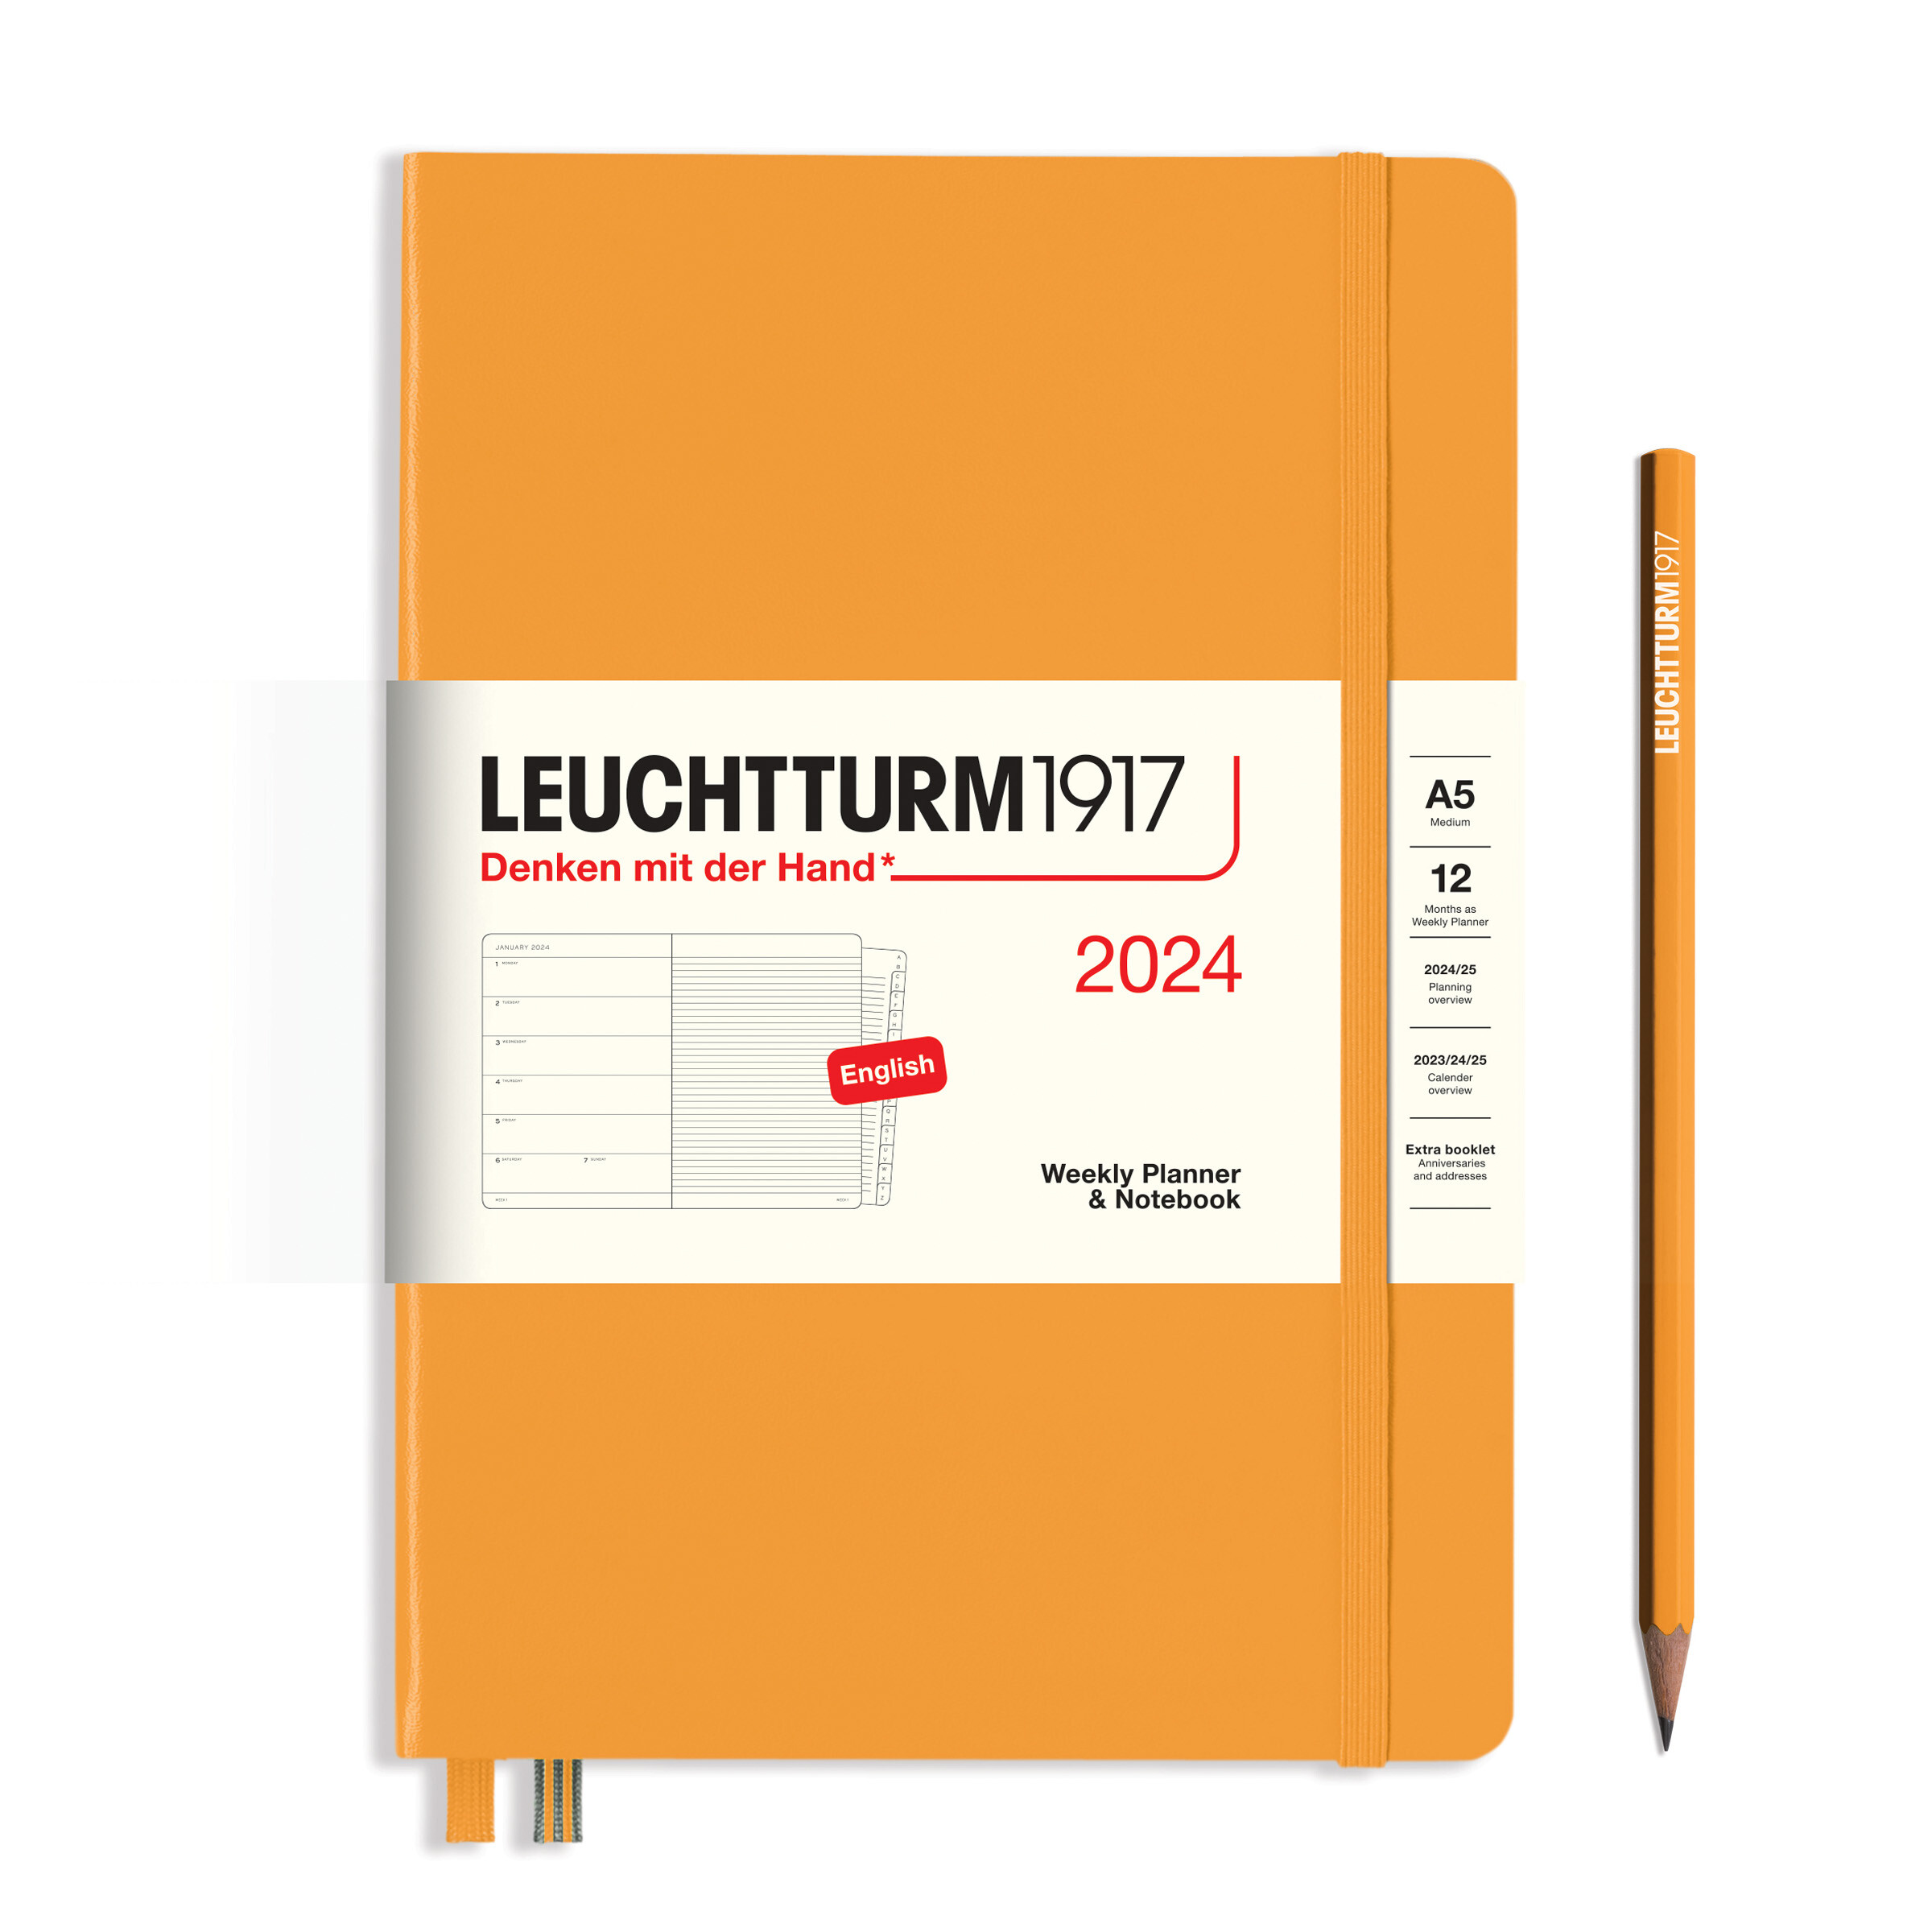 Leuchtturm1917 Weekly Planner & Notebook Hard Cover Medium A5 2024 - Pencraft the boutique